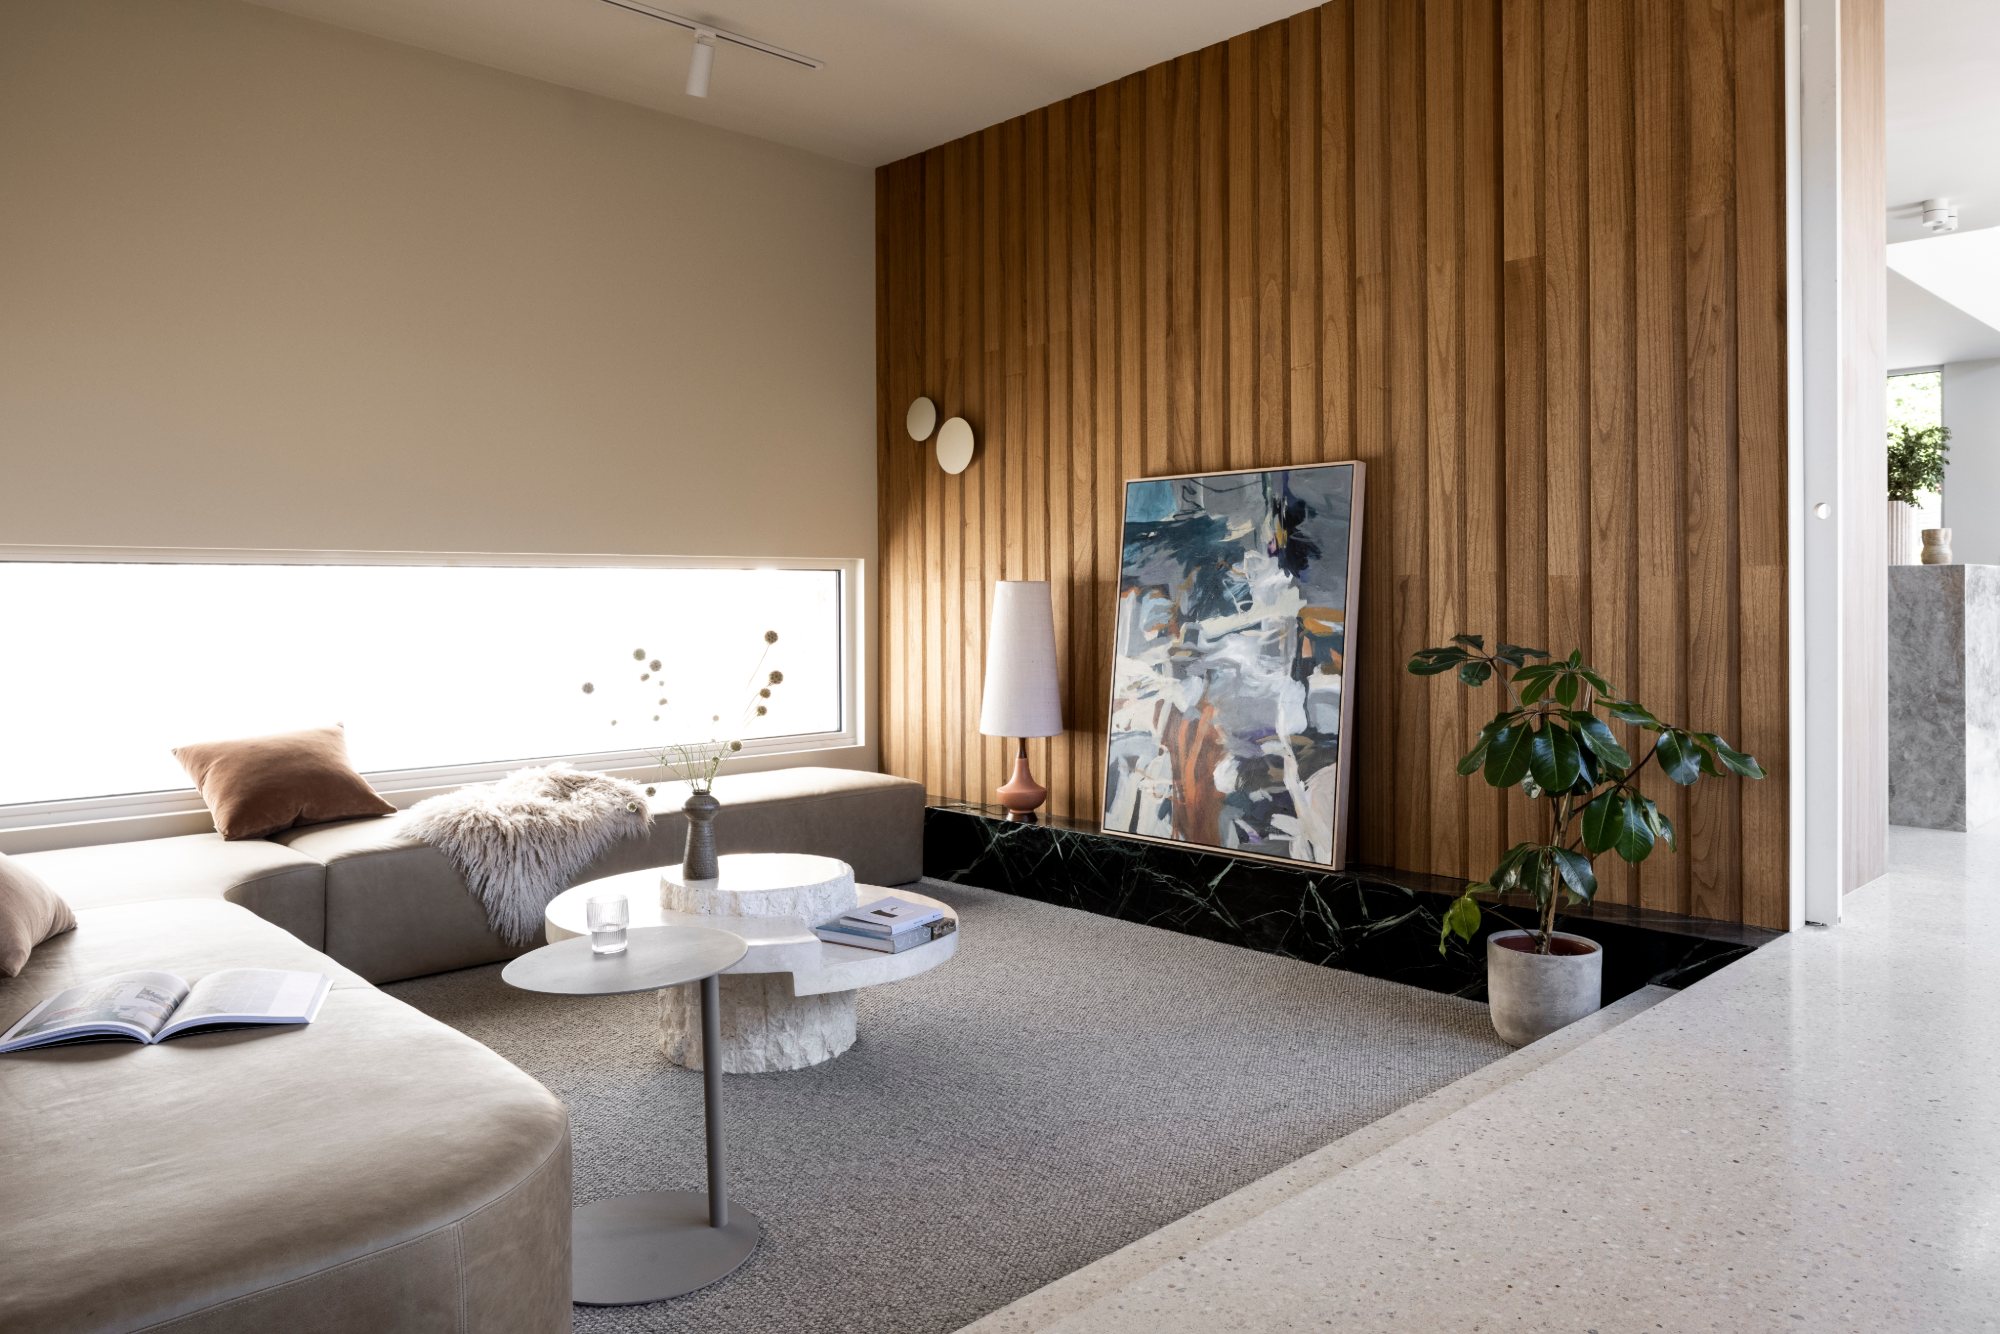 Image 25 of North House 002 in Love, care and beauty in every corner of this Australian home - Cosentino